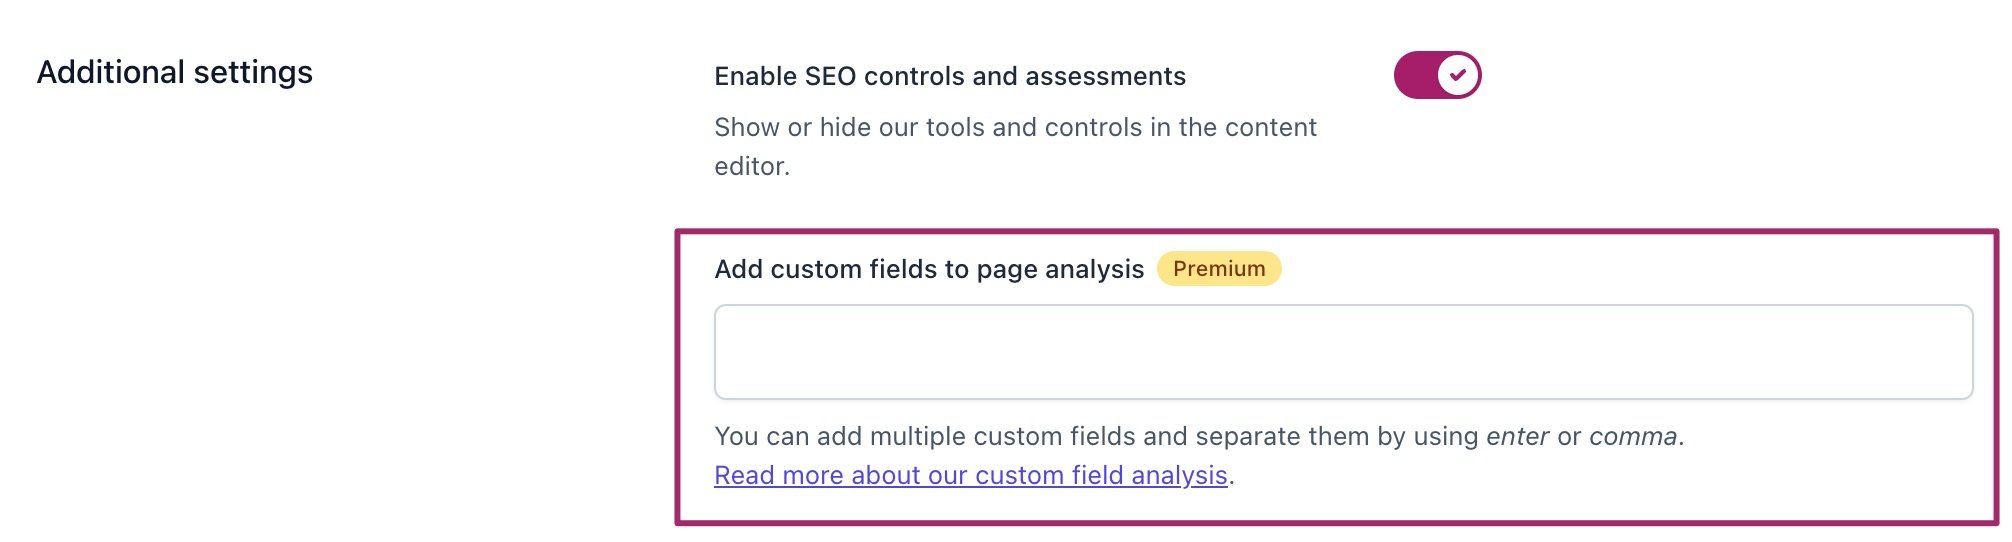 Screenshot of the 'Add custom fields to page analysis' input box in the Additional settings for Posts in Yoast SEO.